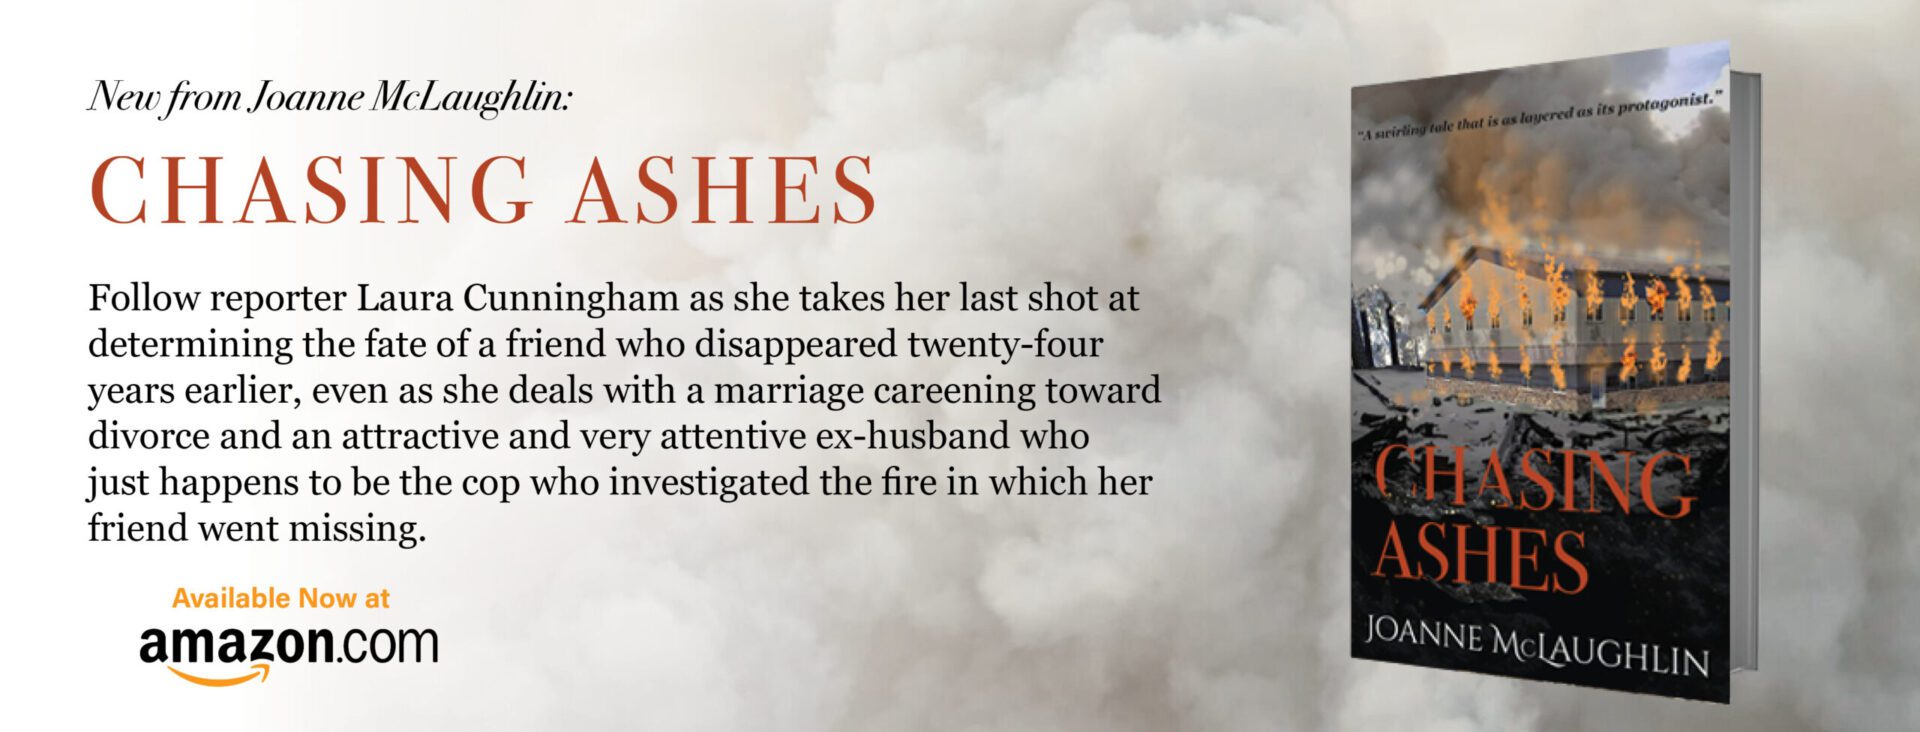 the banner of chasing ashes with the book on the side